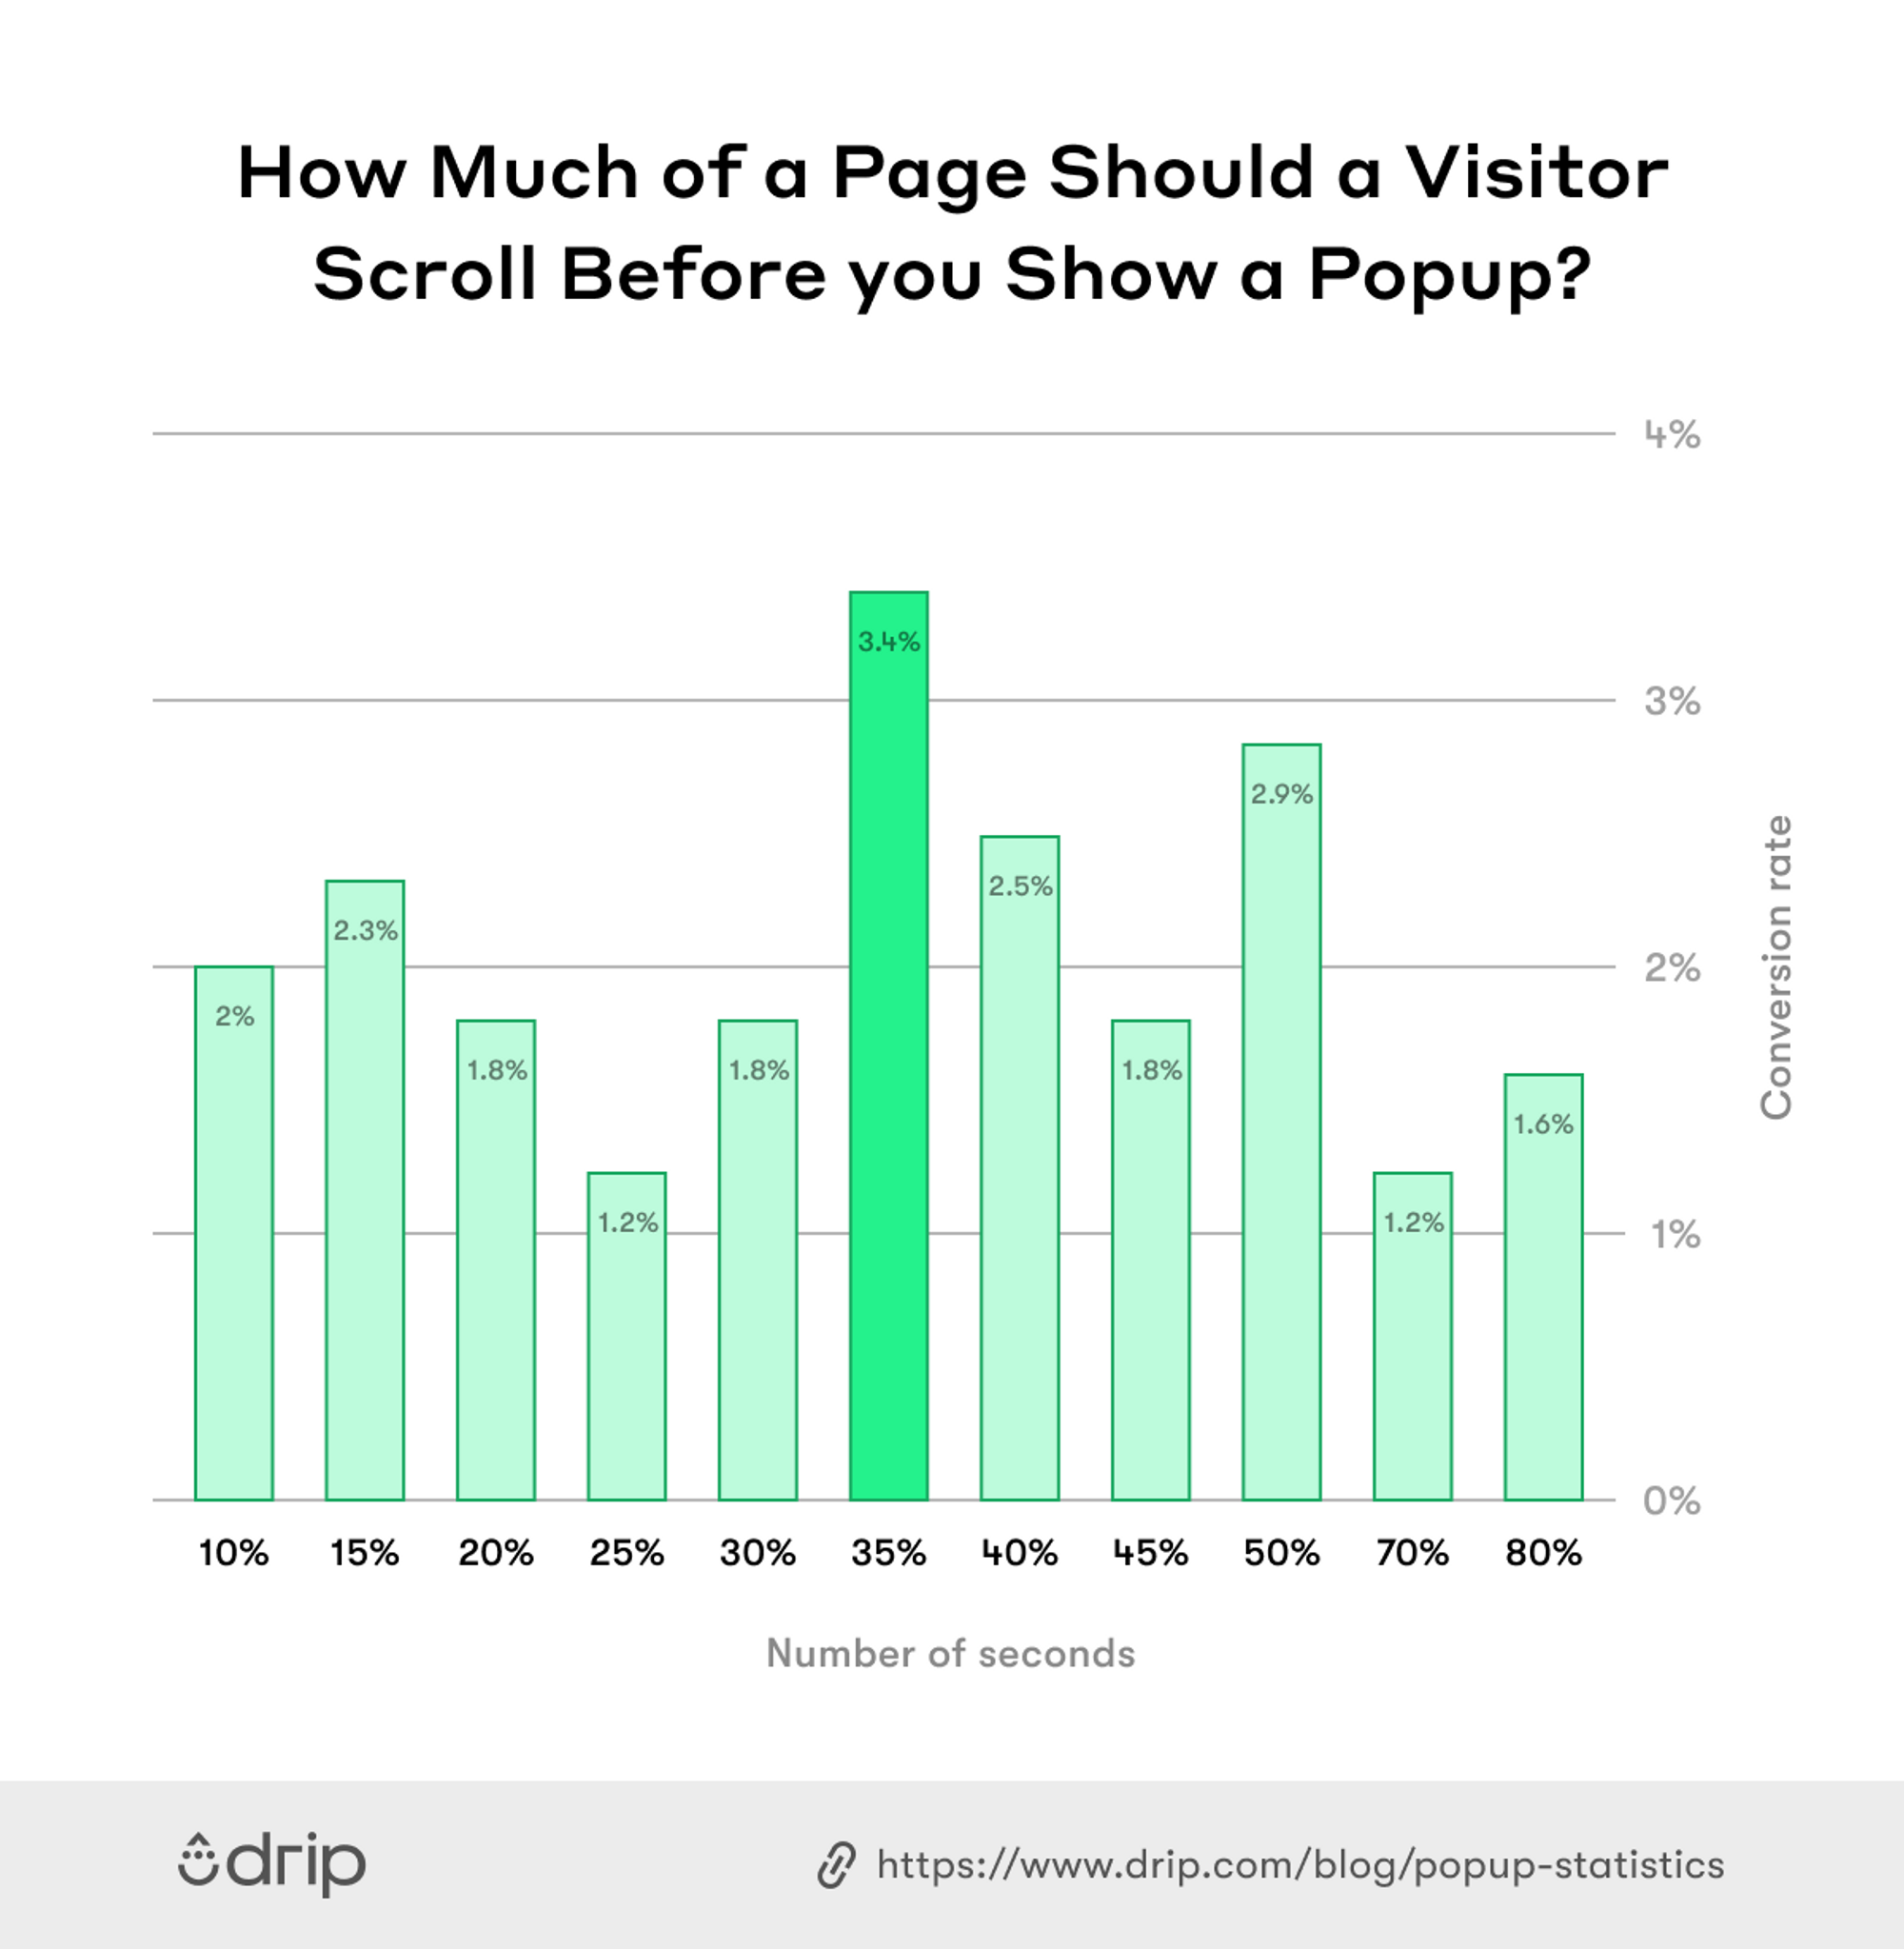 How_Much_of_a_Page_Should_a_Visitor_Scroll_Before_You_Show_a_Popup